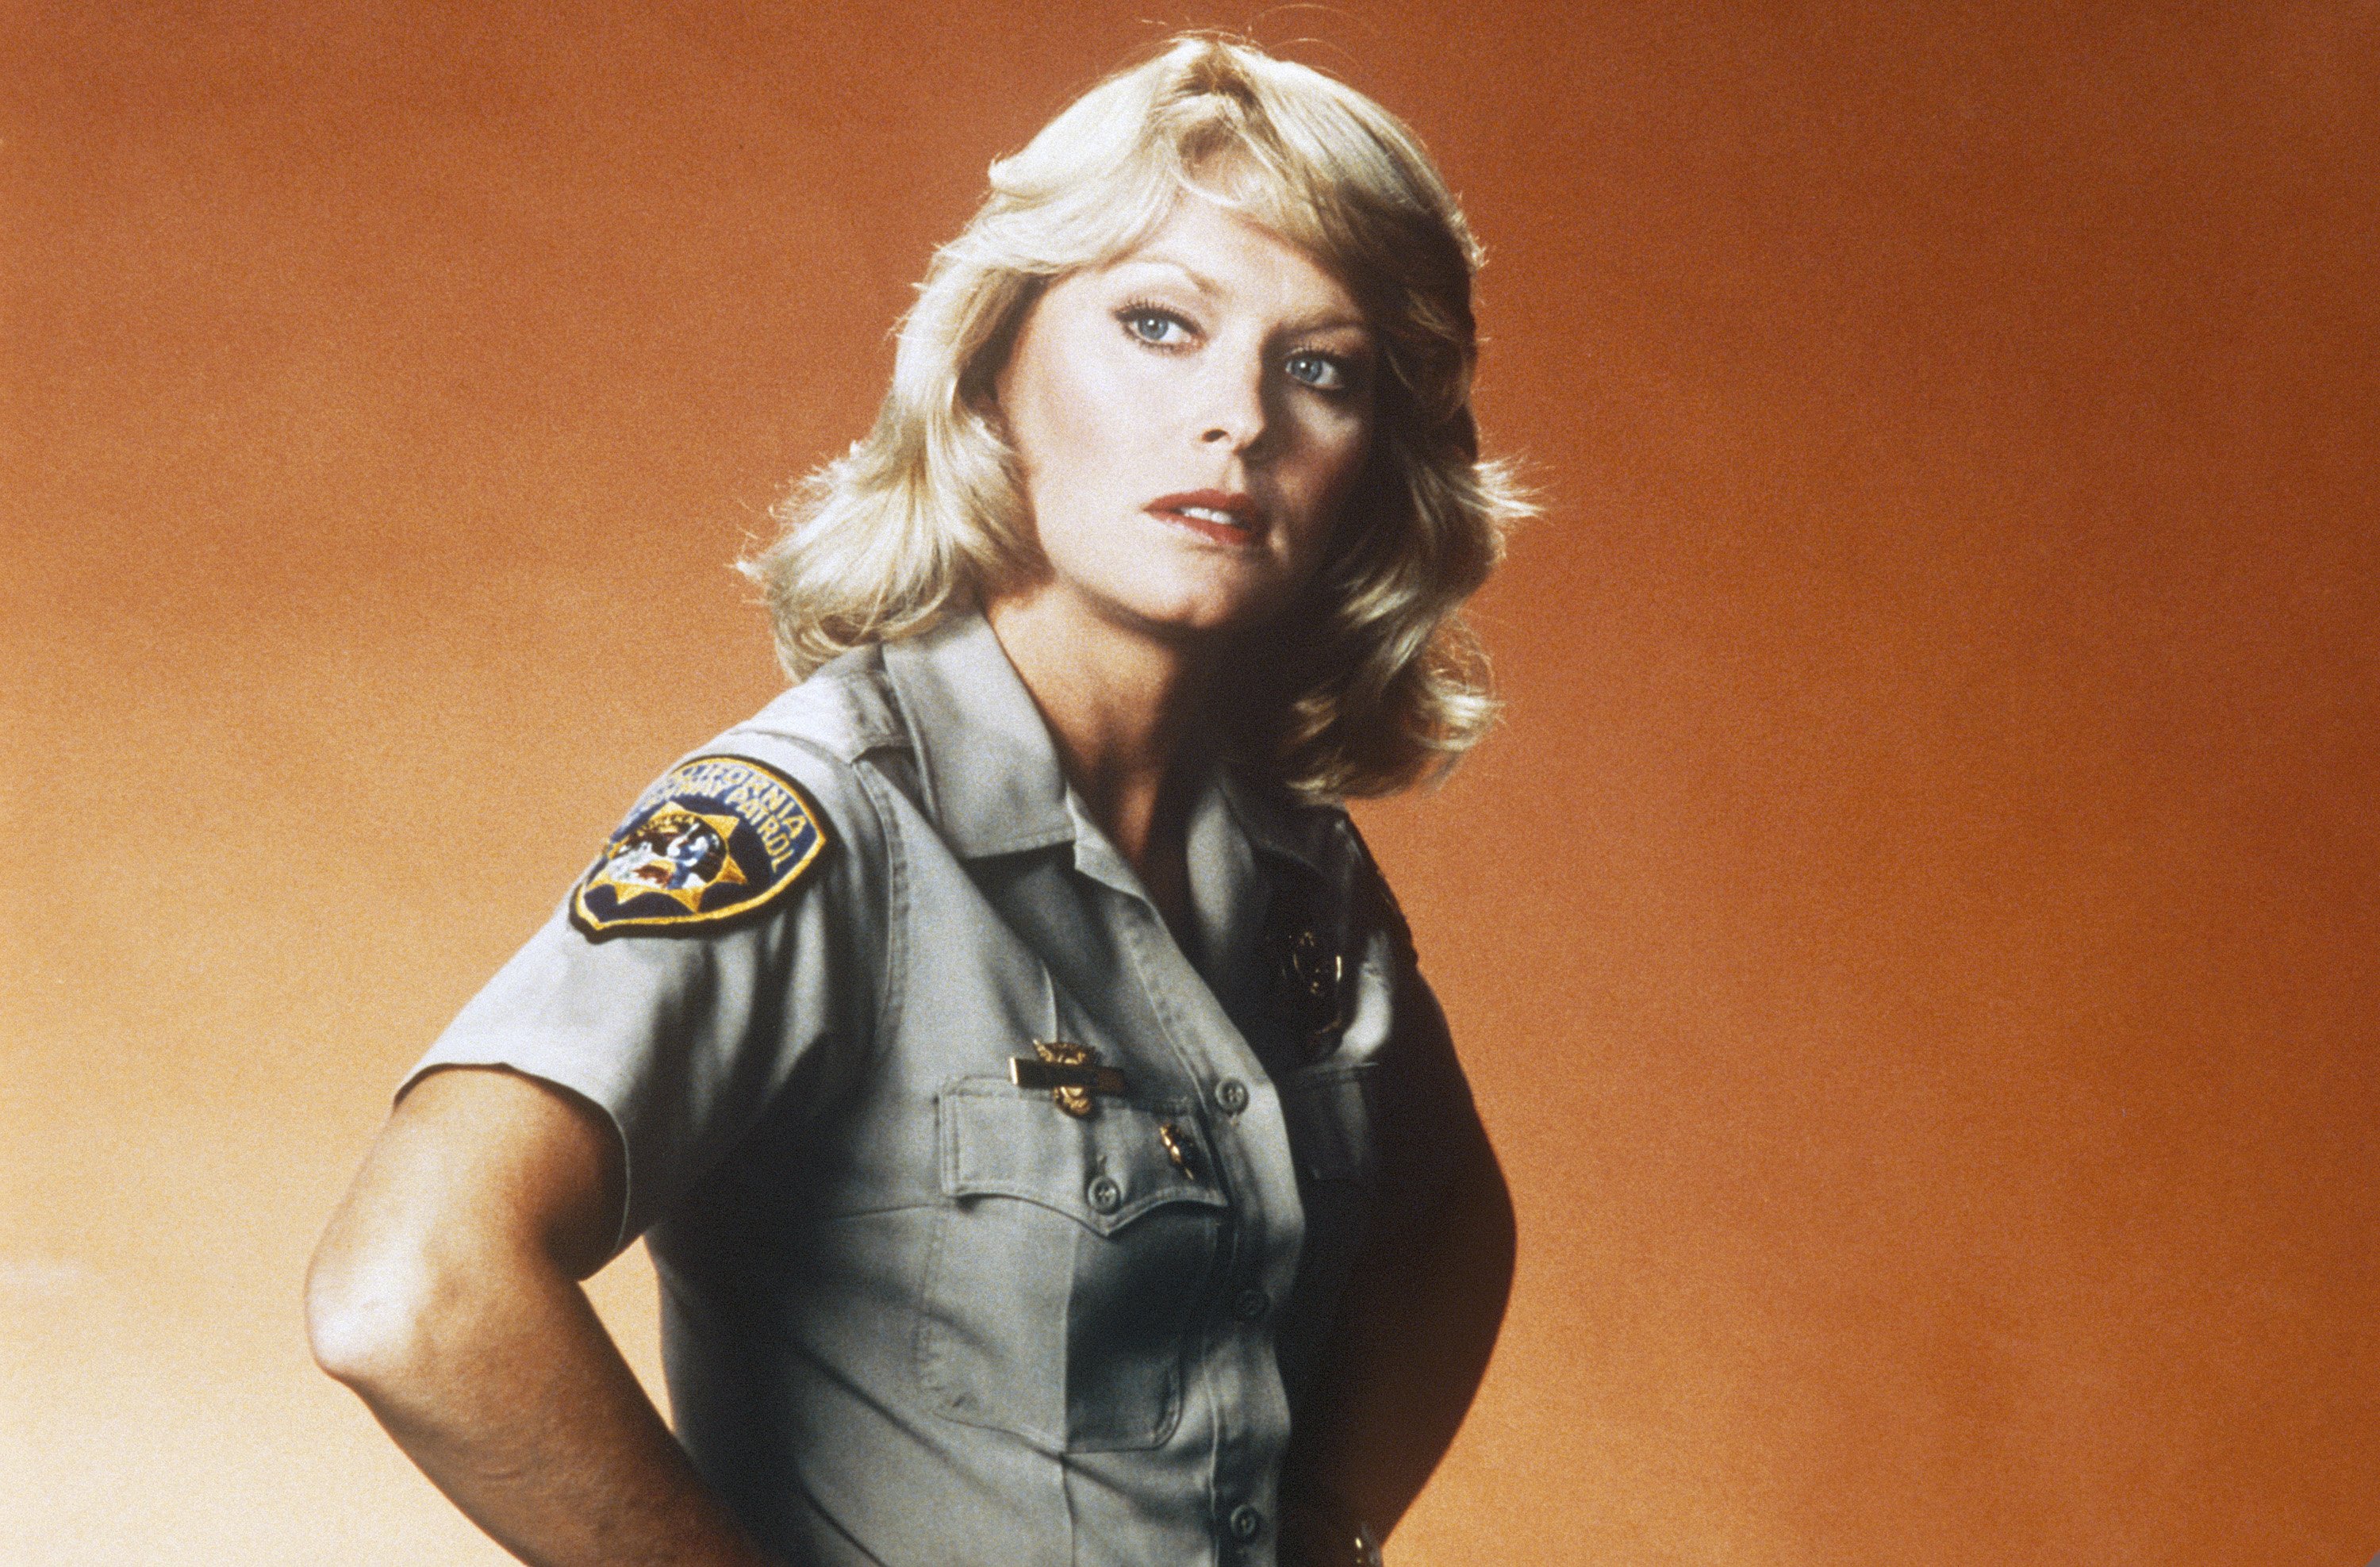 Randi Oakes poses as Officer Bonnie Clark in the 1977 TV series "CHiPs." | Source: Getty Images